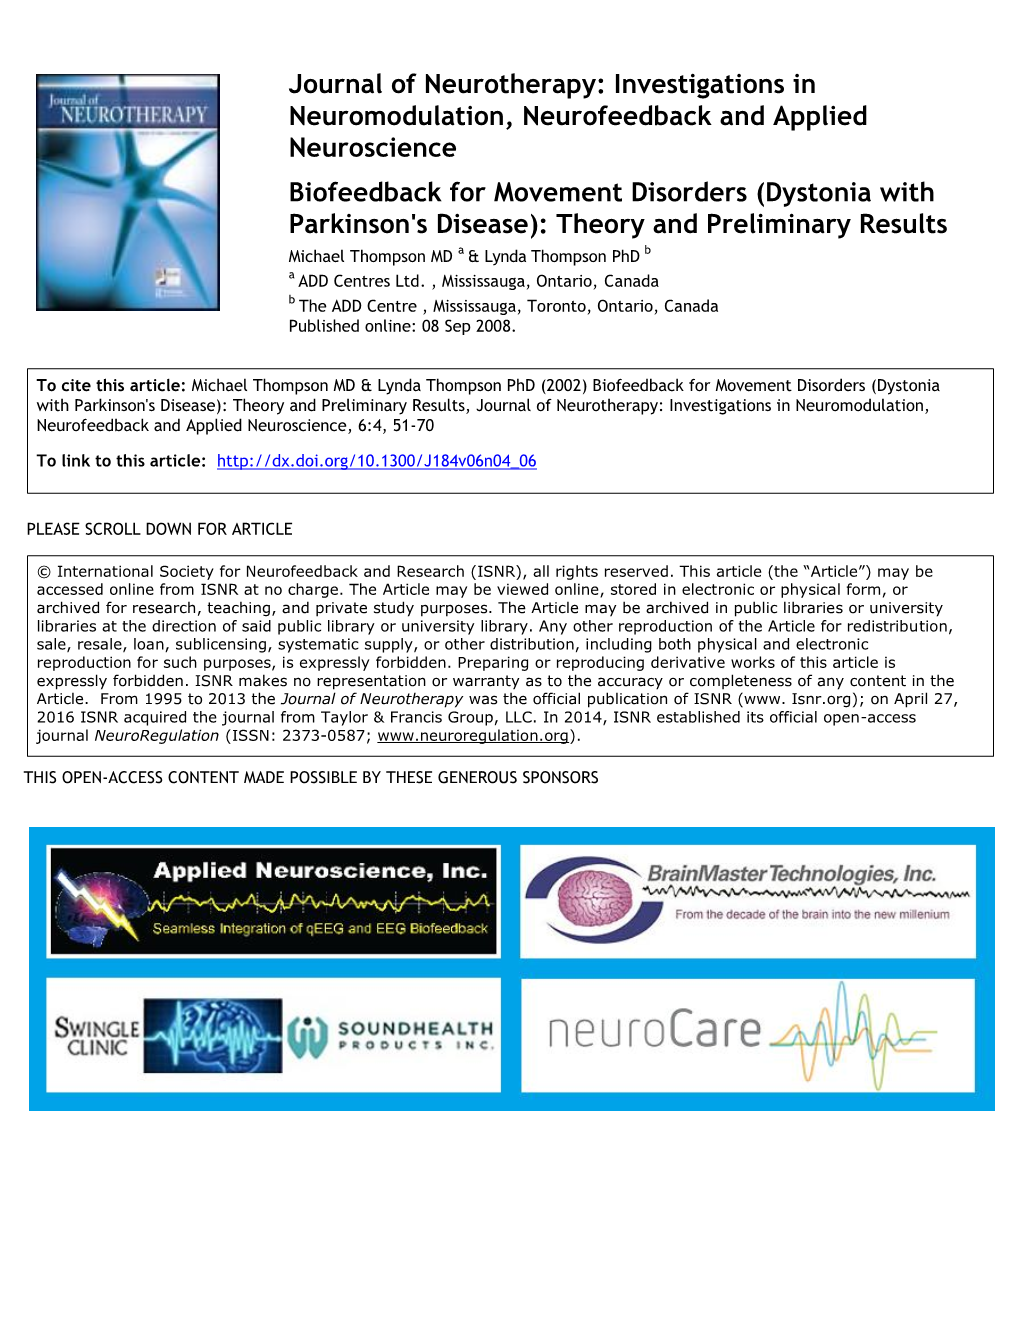 Dystonia with Parkinson's Disease): Theory and Preliminary Results Michael Thompson MD a & Lynda Thompson Phd B a ADD Centres Ltd